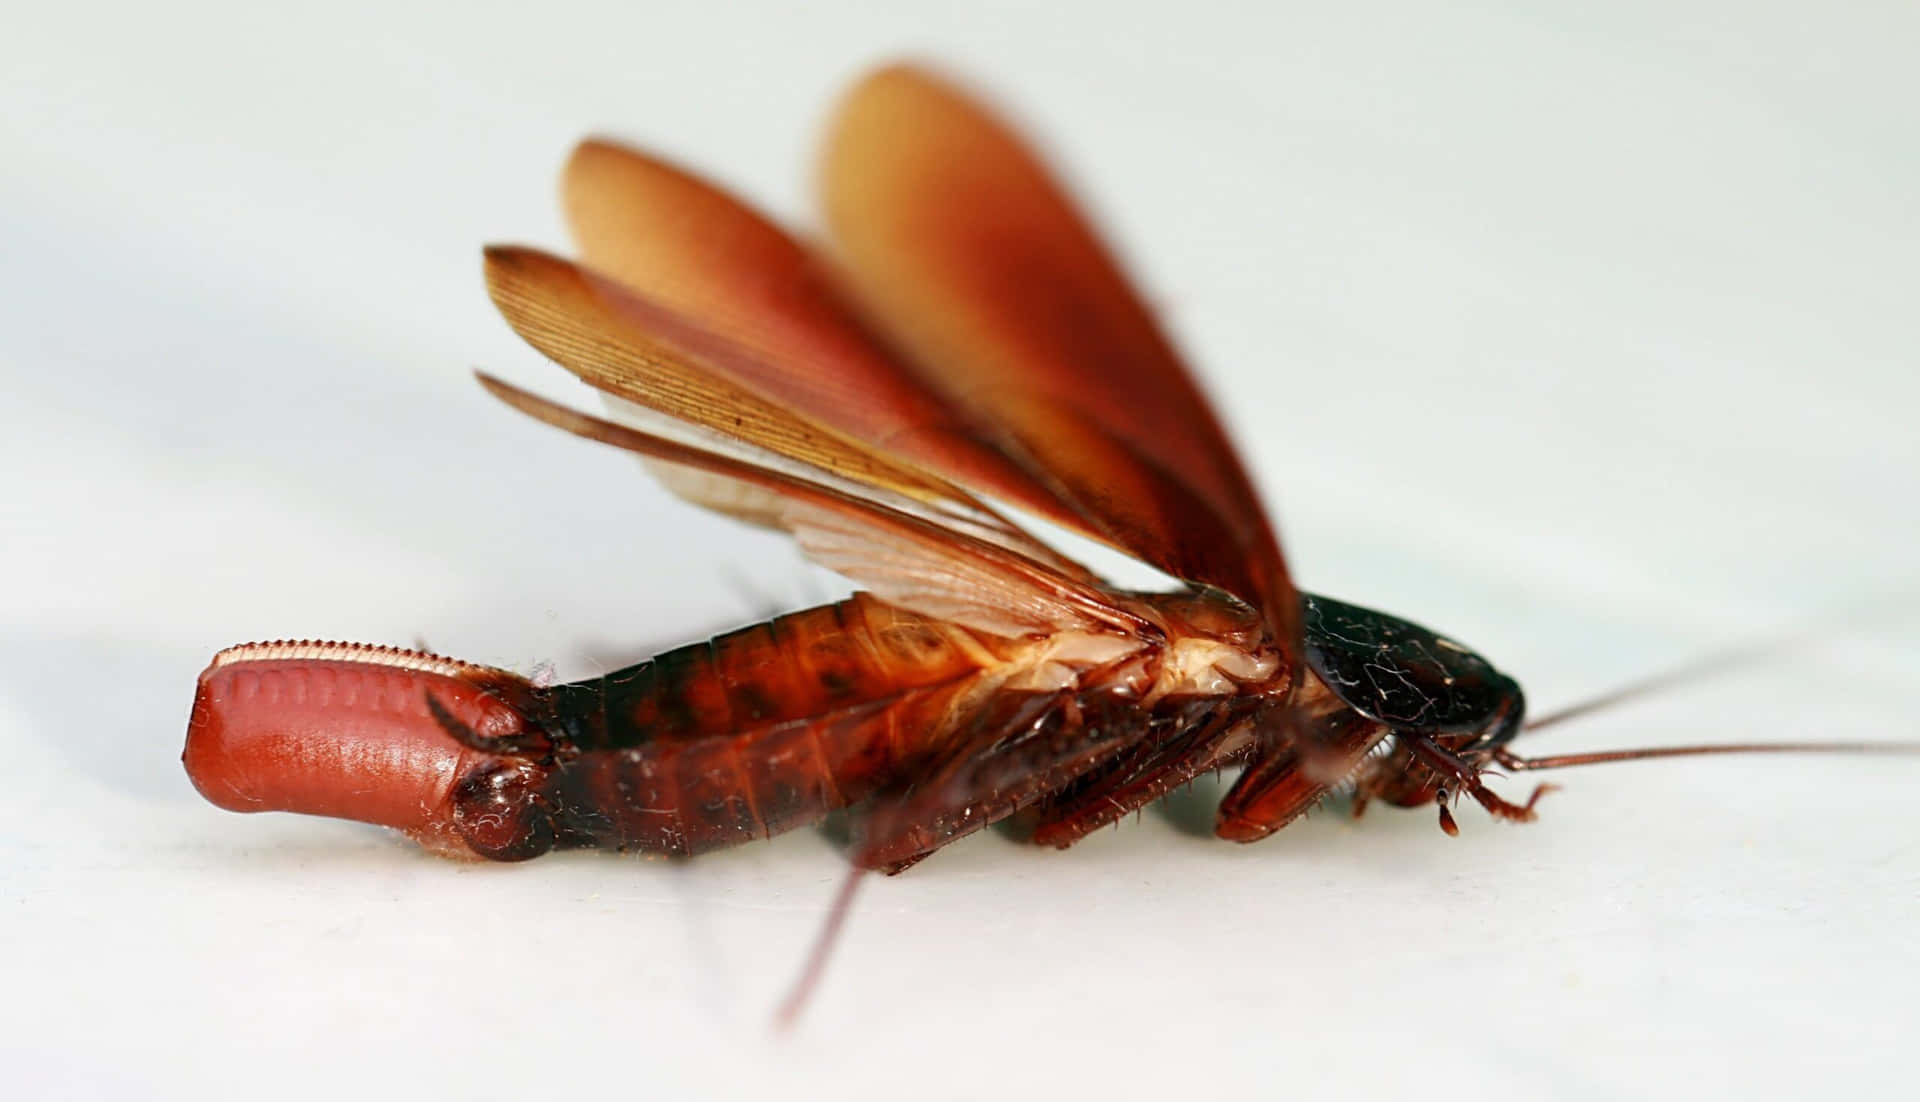 'A Cockroach Isn't Something to Fear - It's a Reminder of Nature's Strength and Resilience"